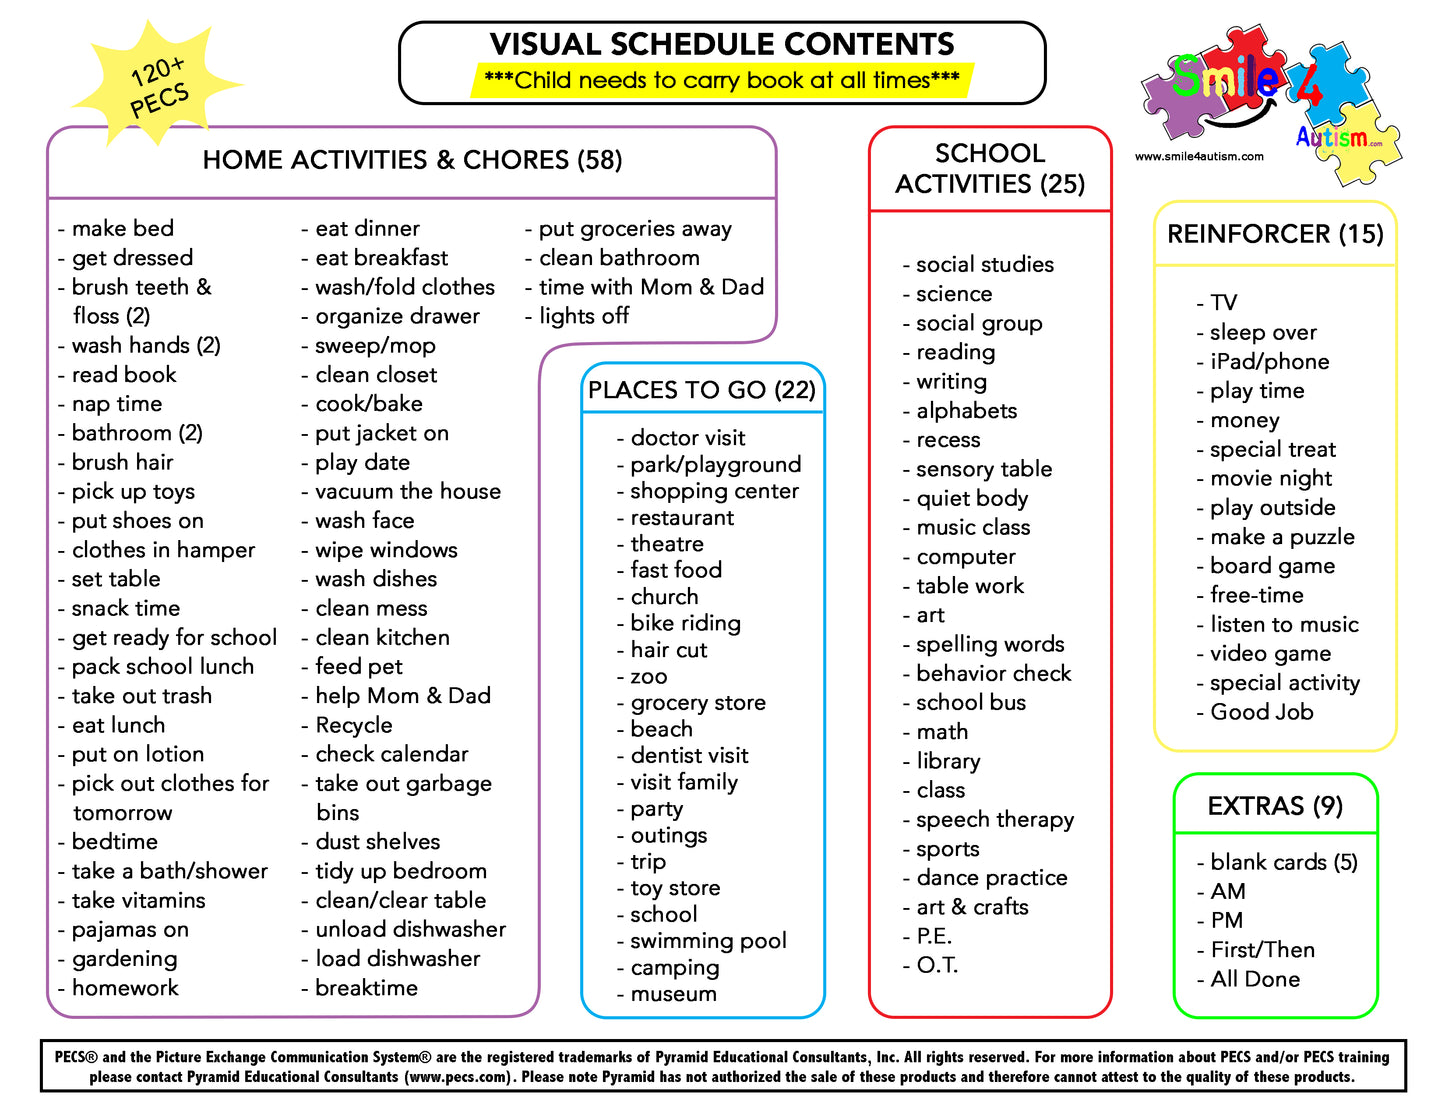 Daily Schedule Great Visual Behavioral Tool for Structure & Independency at Home, School & in The Community - 125 Color Plastic Cards included!